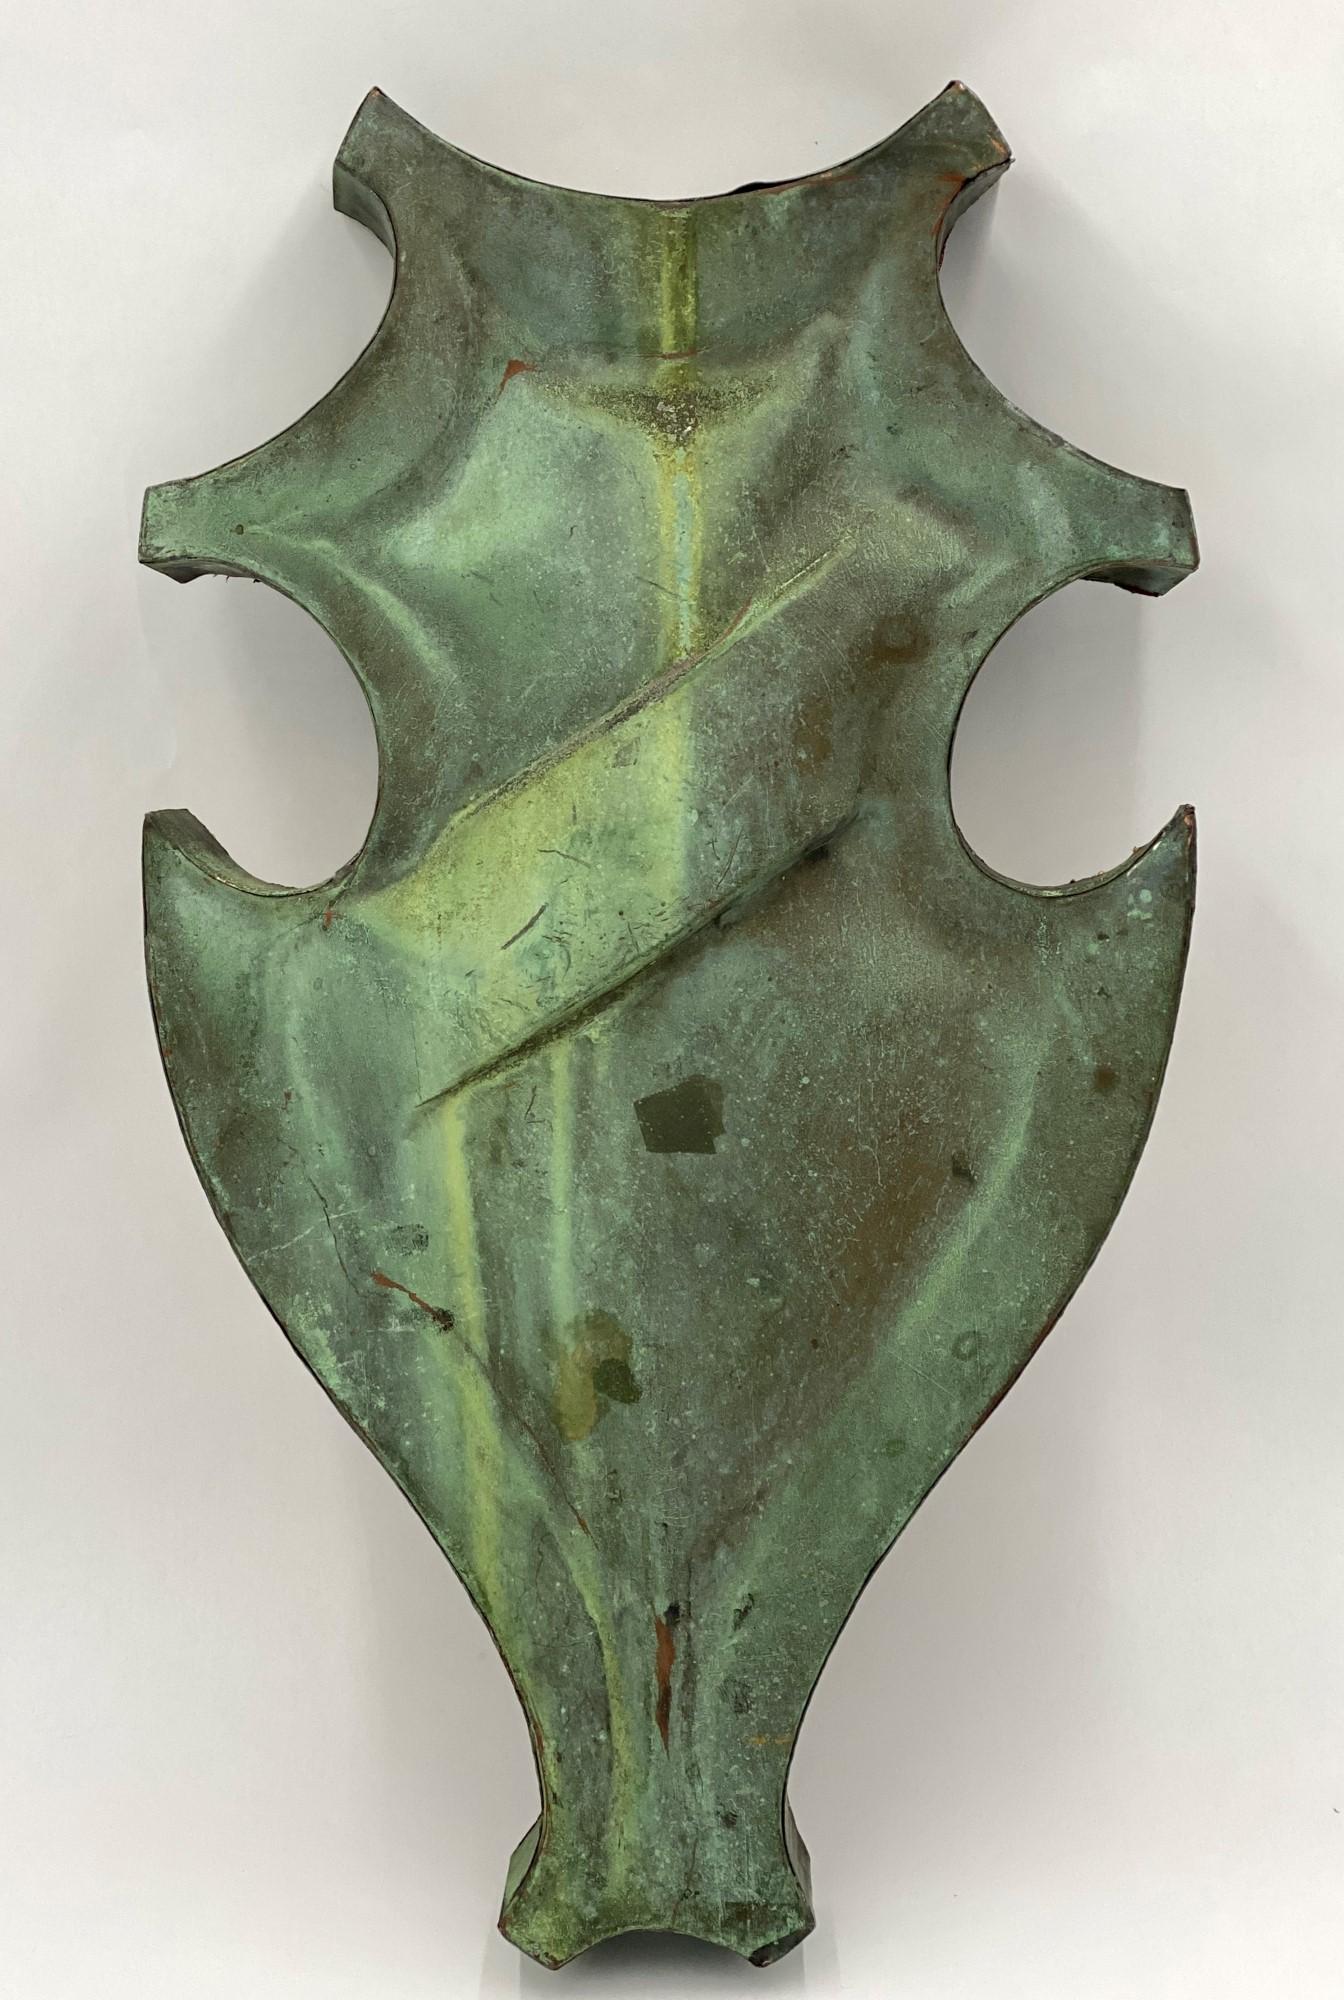 Early 20th century copper shield with original verdigris patina recovered from NYC building soffit. Now mounted on plywood and ready to hang as a wall ornament. Priced each. This can be seen at our 333 West 52nd St location in the Theater District